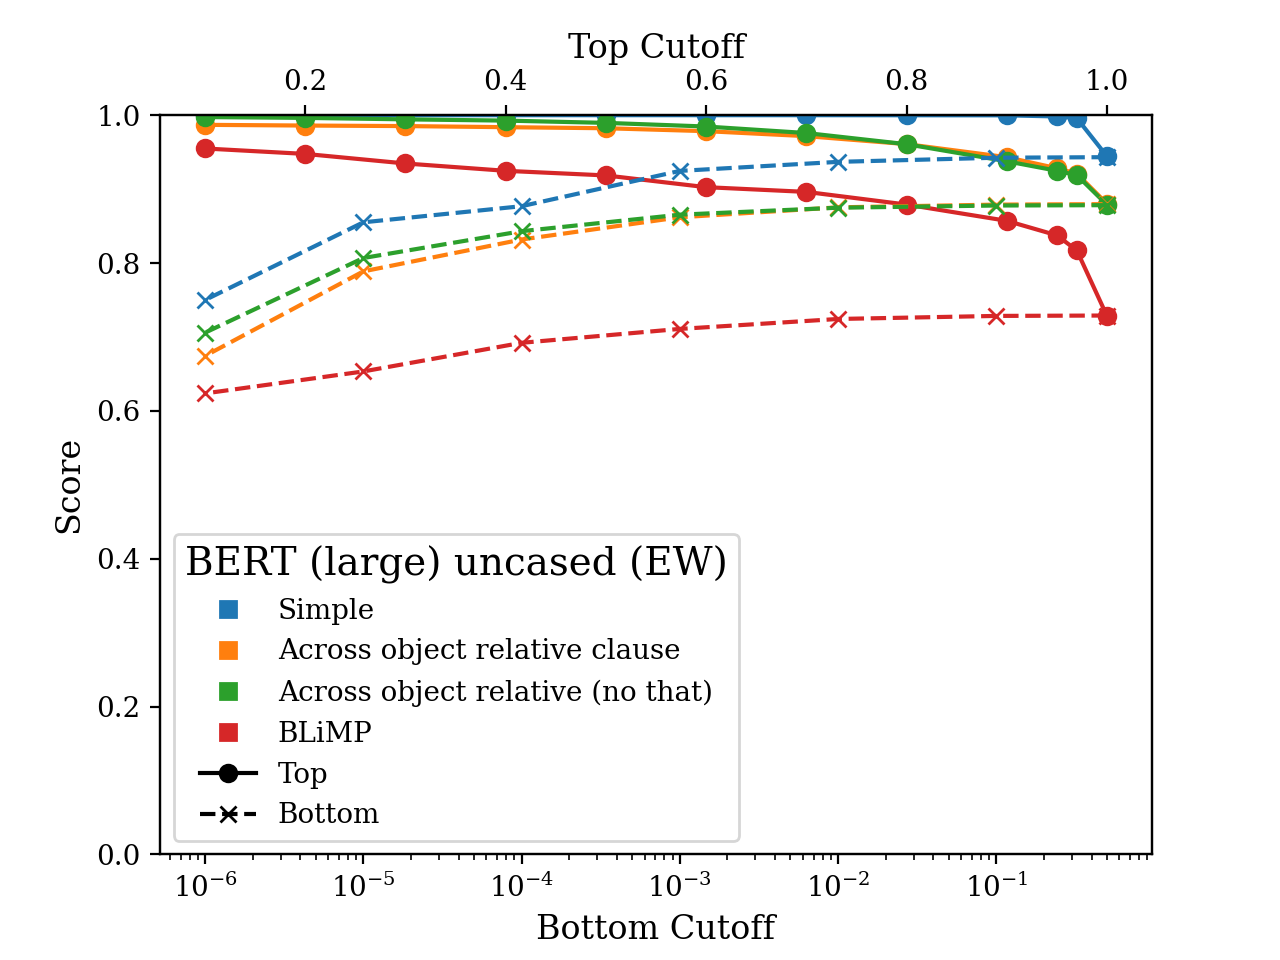 A plot showing our EW score on a subset of the minimal pairs in Marvin and Linzen (2018) and BLiMP datasets. The more likely verbs are preferntially conjugated correctly.